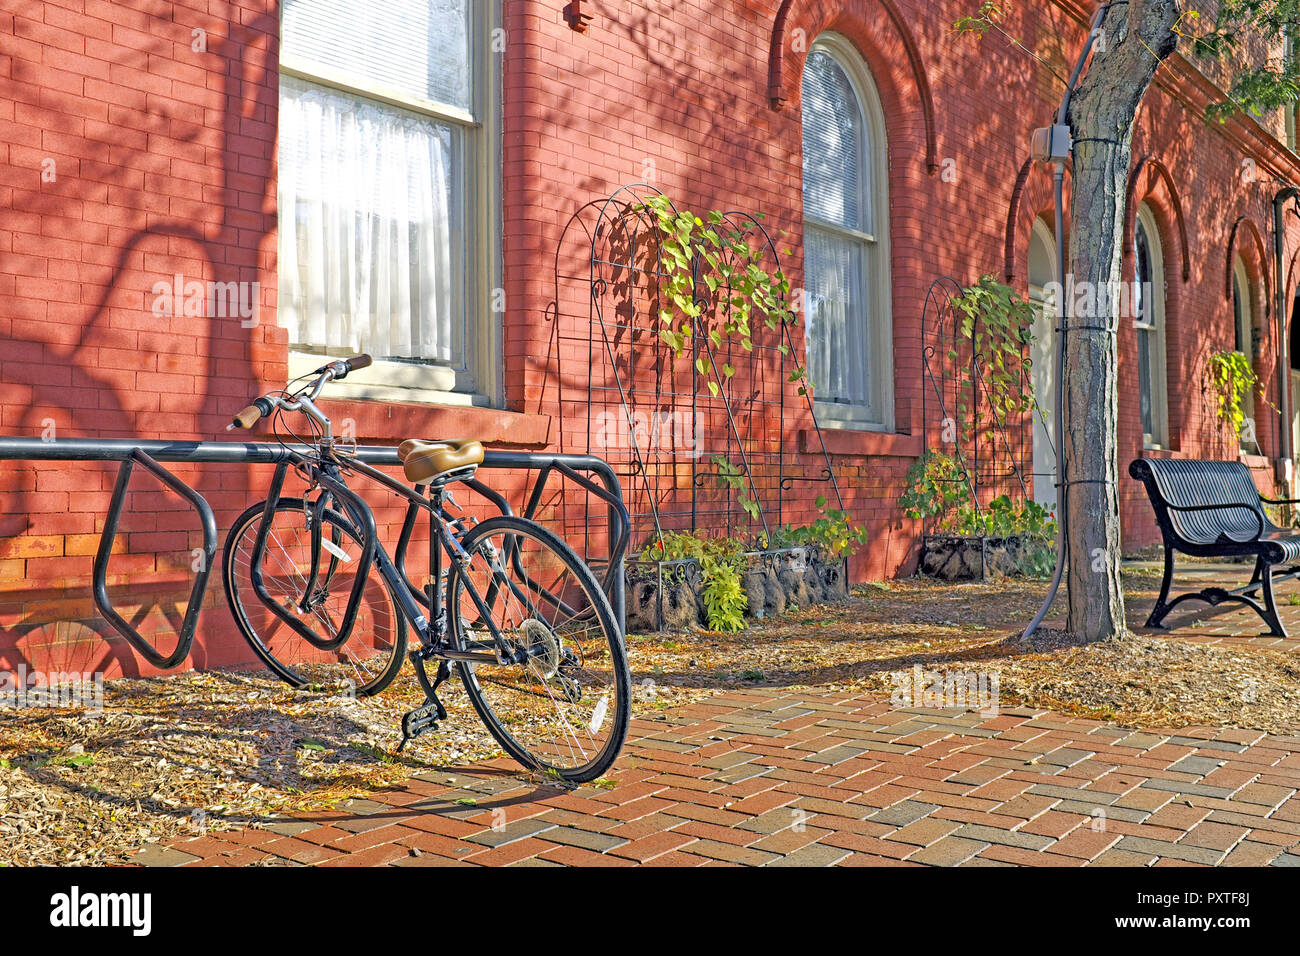 An early fall scene in Wiloughby, Ohio where a single bike is parked next to a russet orange building with a smattering of fallen autumn leaves. Stock Photo